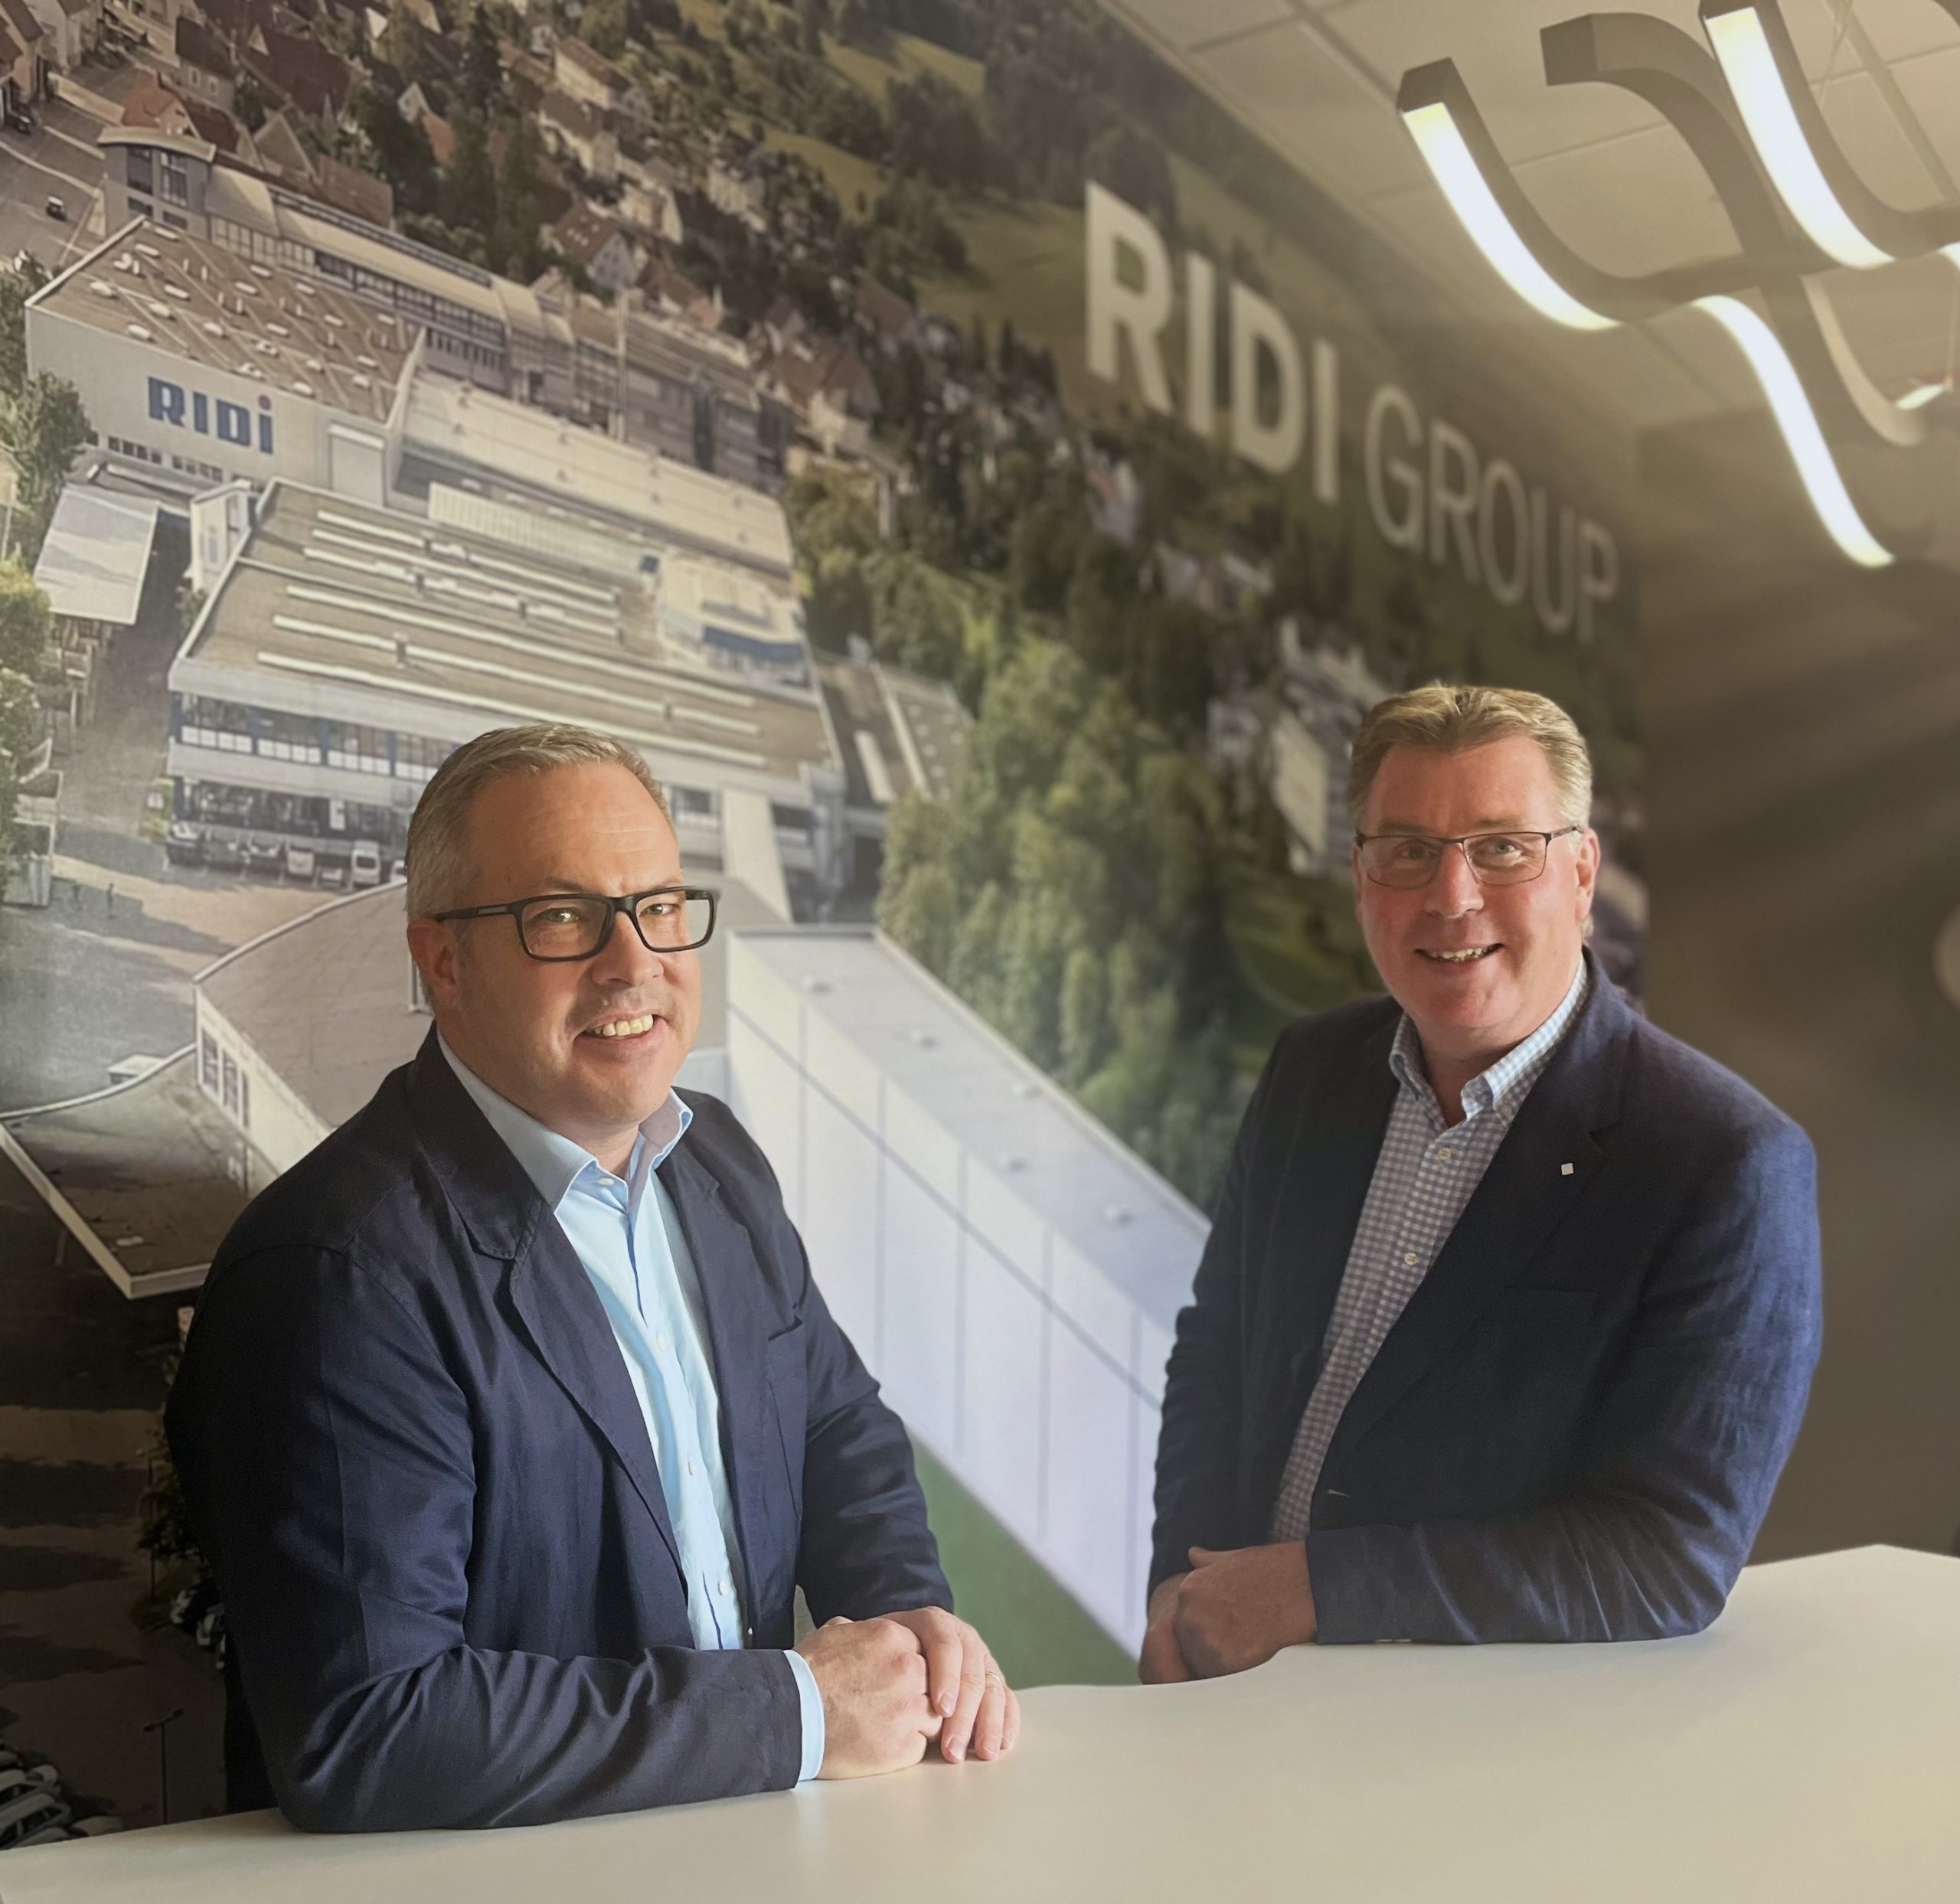 Ridi Lighting Ltd is proud to announce the acquisition of Lightworks with effect from 1st September 2023.